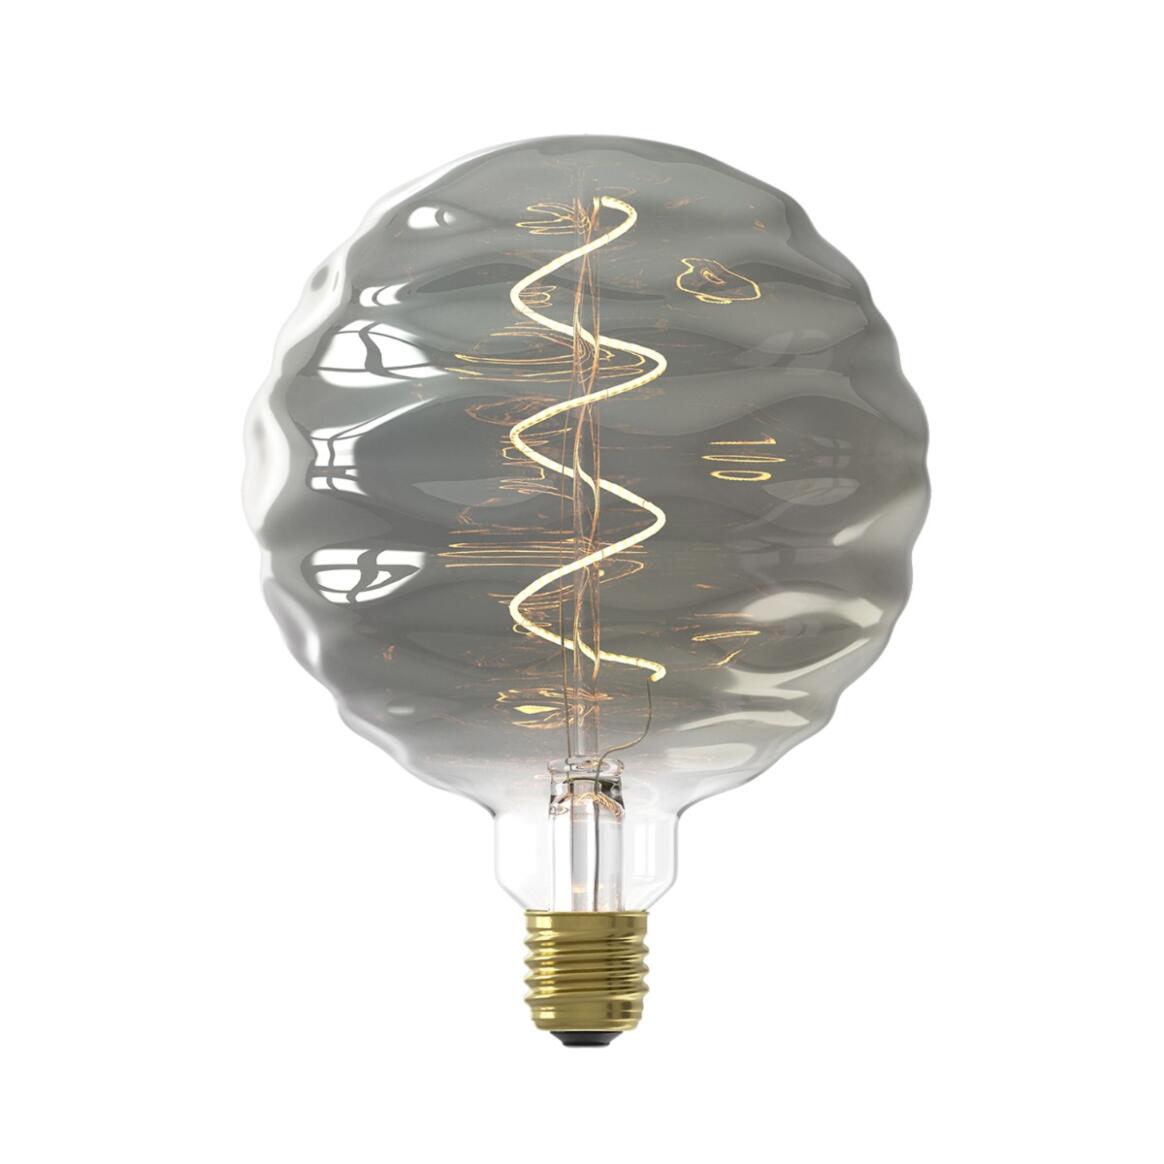 Large LED Ripple Effect Bulb Dimmable E27 4W 2100K 60lm 15cm main product image